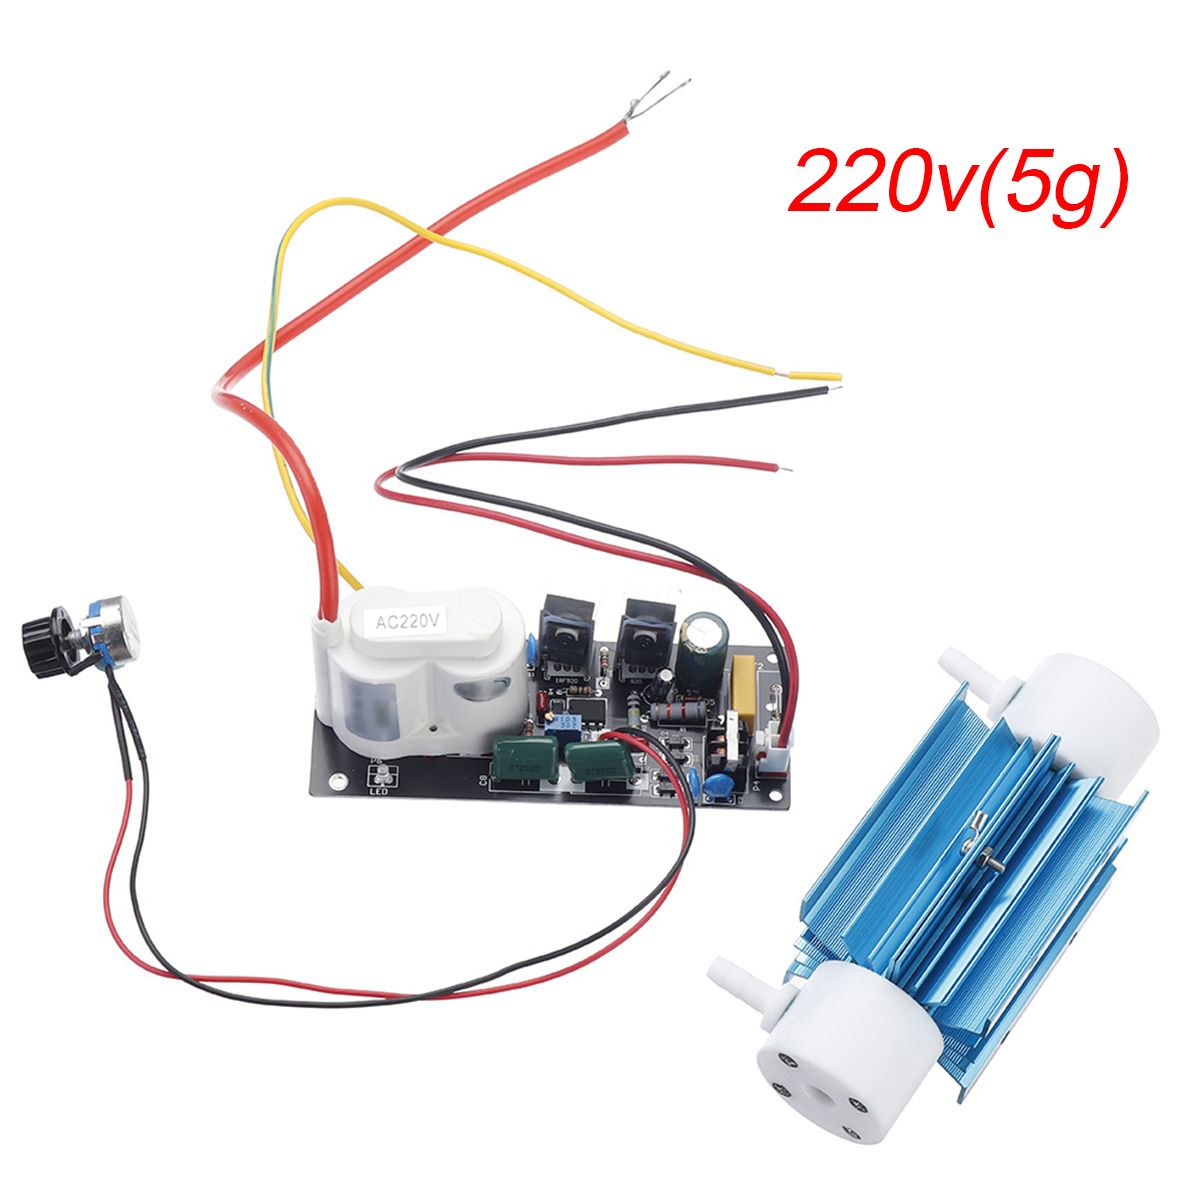 220V-5g-Silica-Tube-Ozone-Generator-Module-Ozone-Output-Adjustable-Open-Power-Pack-with-Accessory-1771318